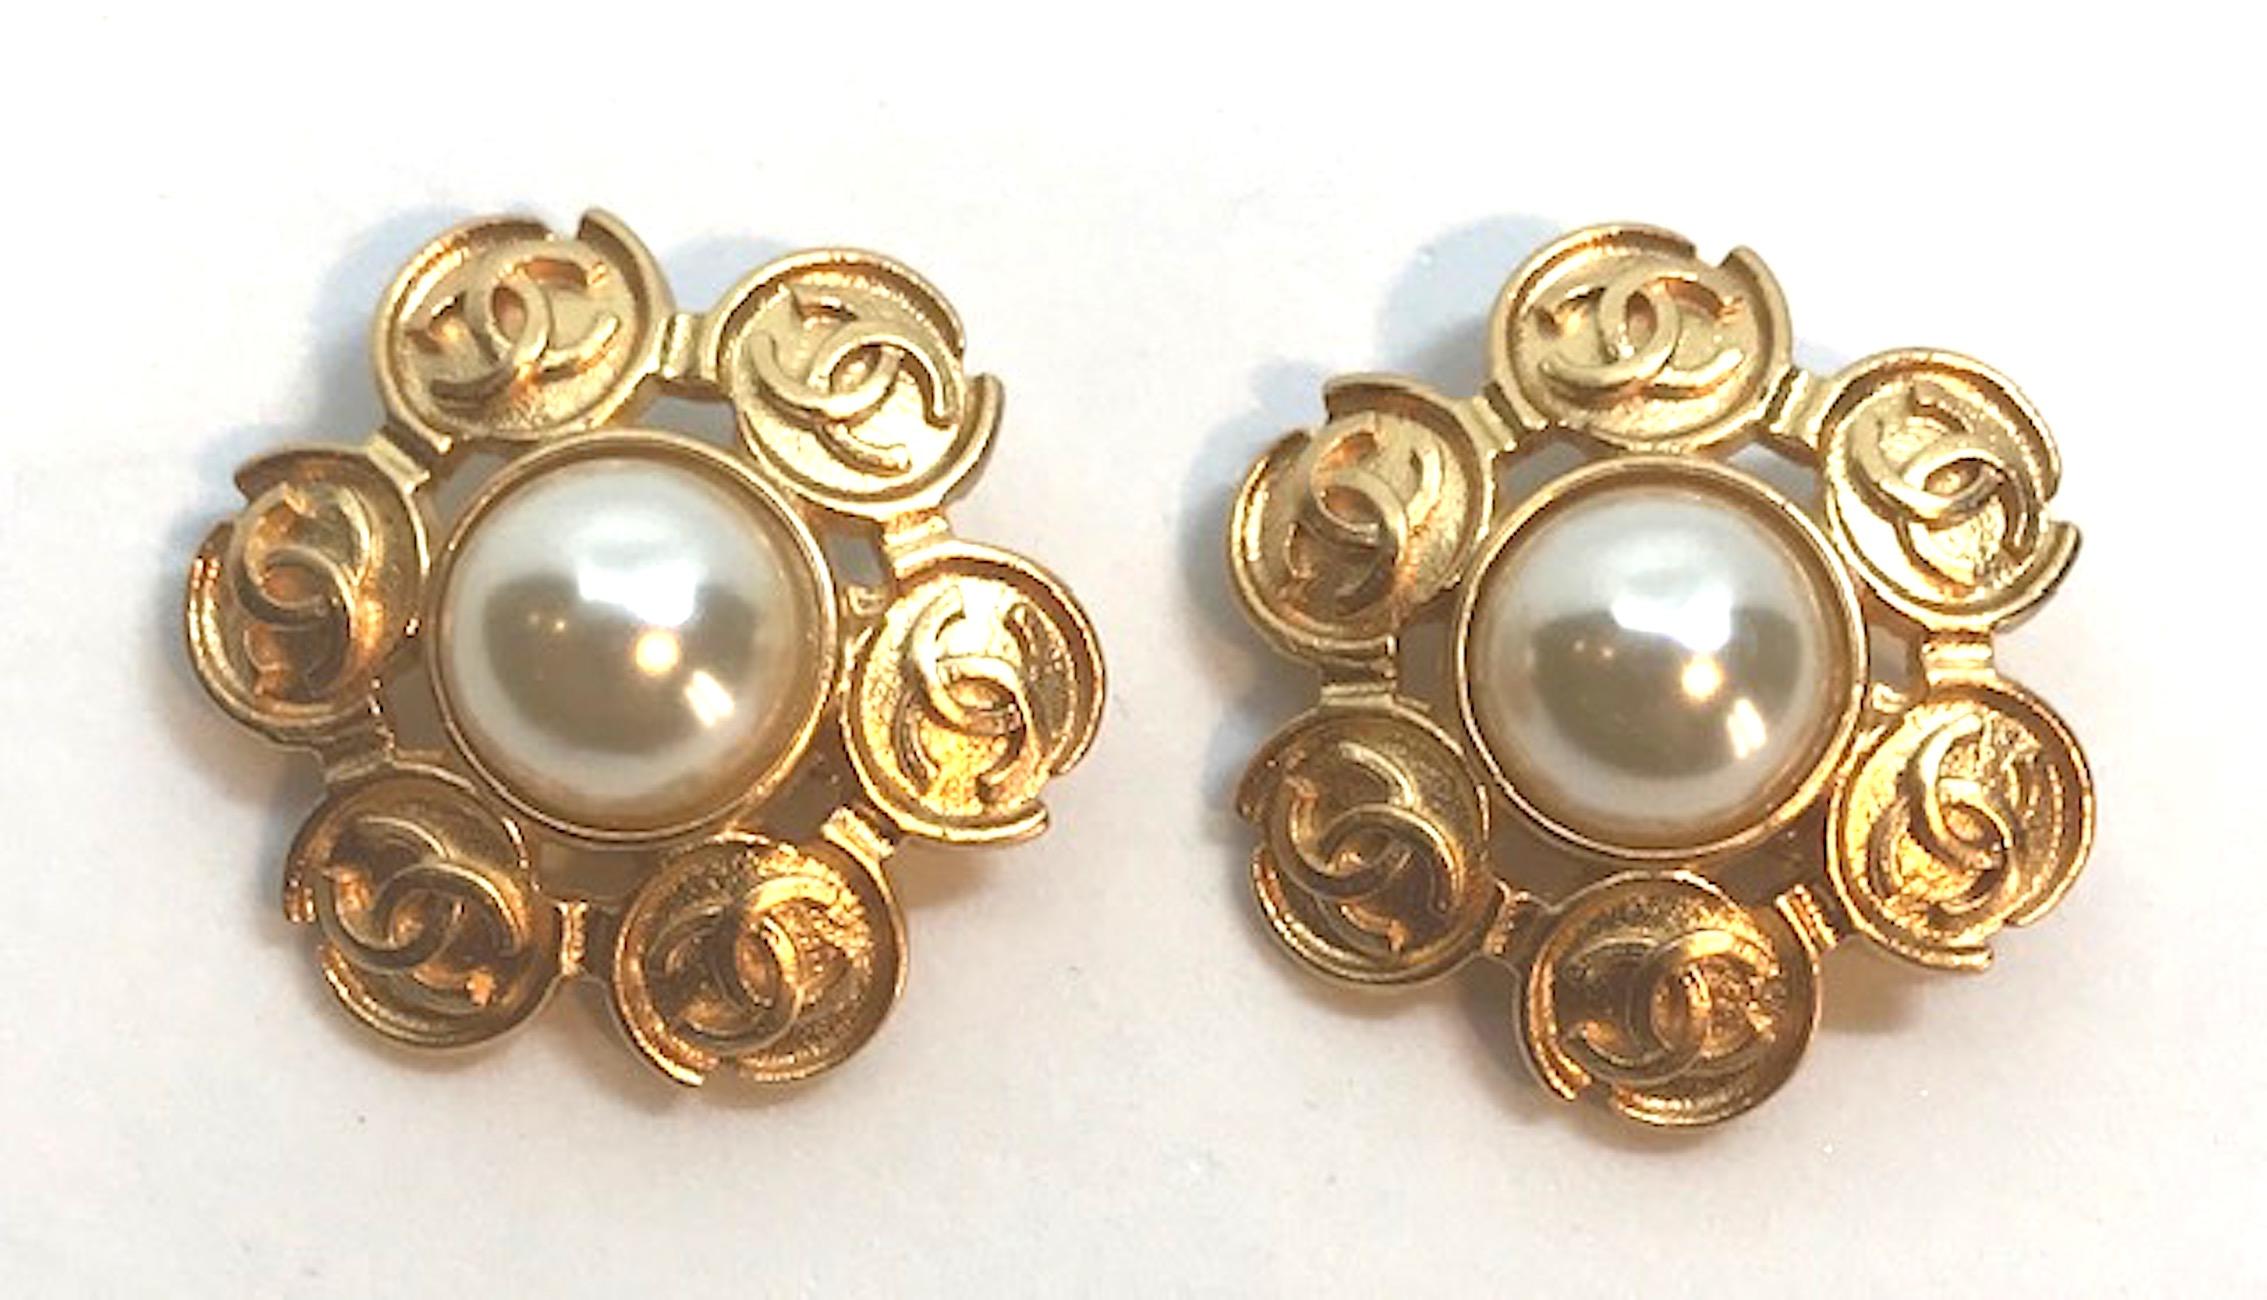 In excellent and like new condition is this lovely pair of gold tone and faux pearl Chanel earrings from the 1995 Spring collection. Each earring measures 1.13 inches wide and 1.19 inches high and has the Chanel oval signature plaque on the back